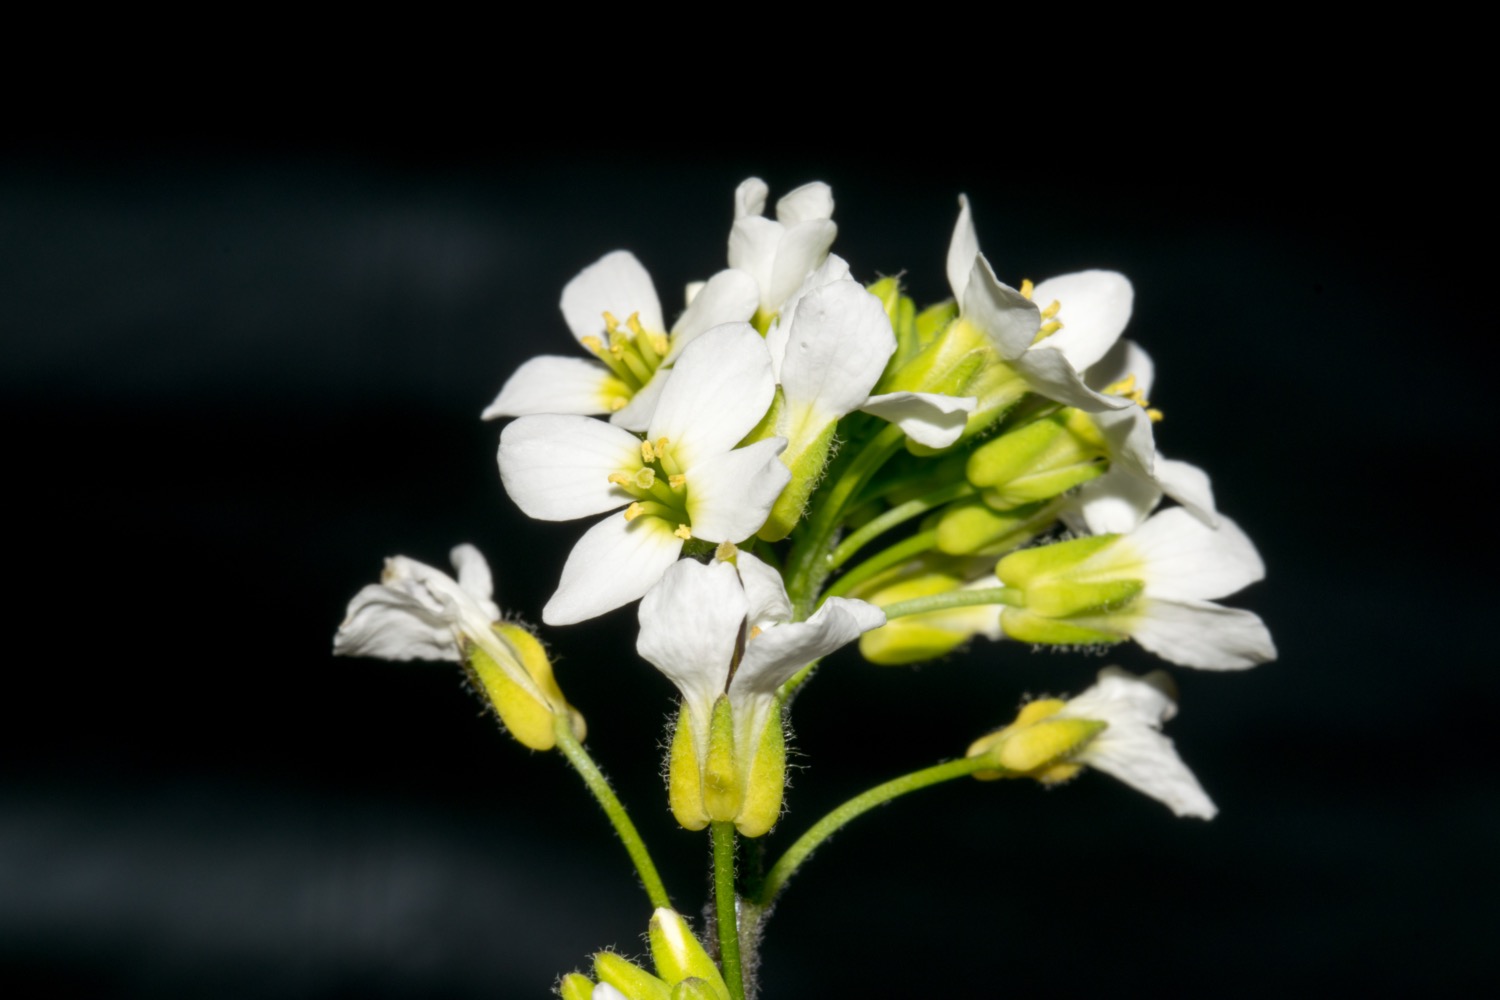 small white flowers with green stems against a black background